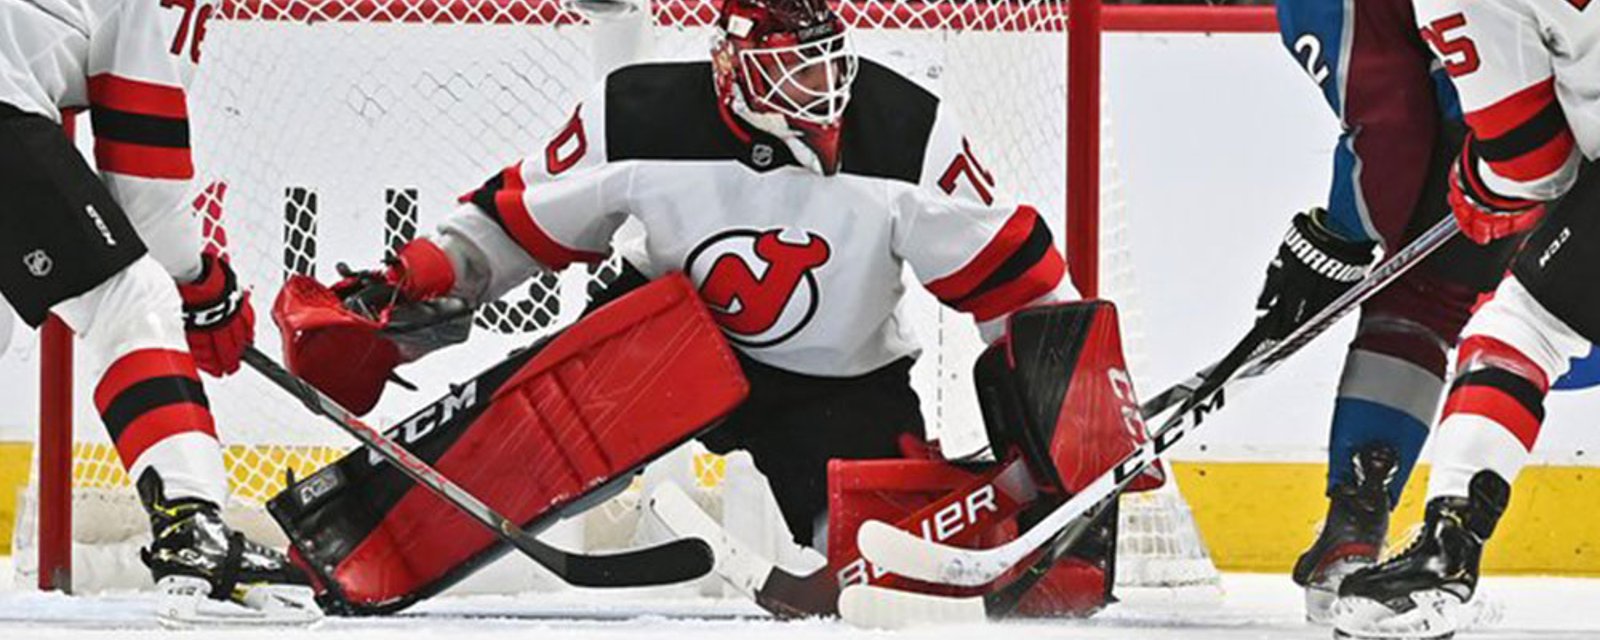 Two NHL players on waivers, including goalie Louis Domingue